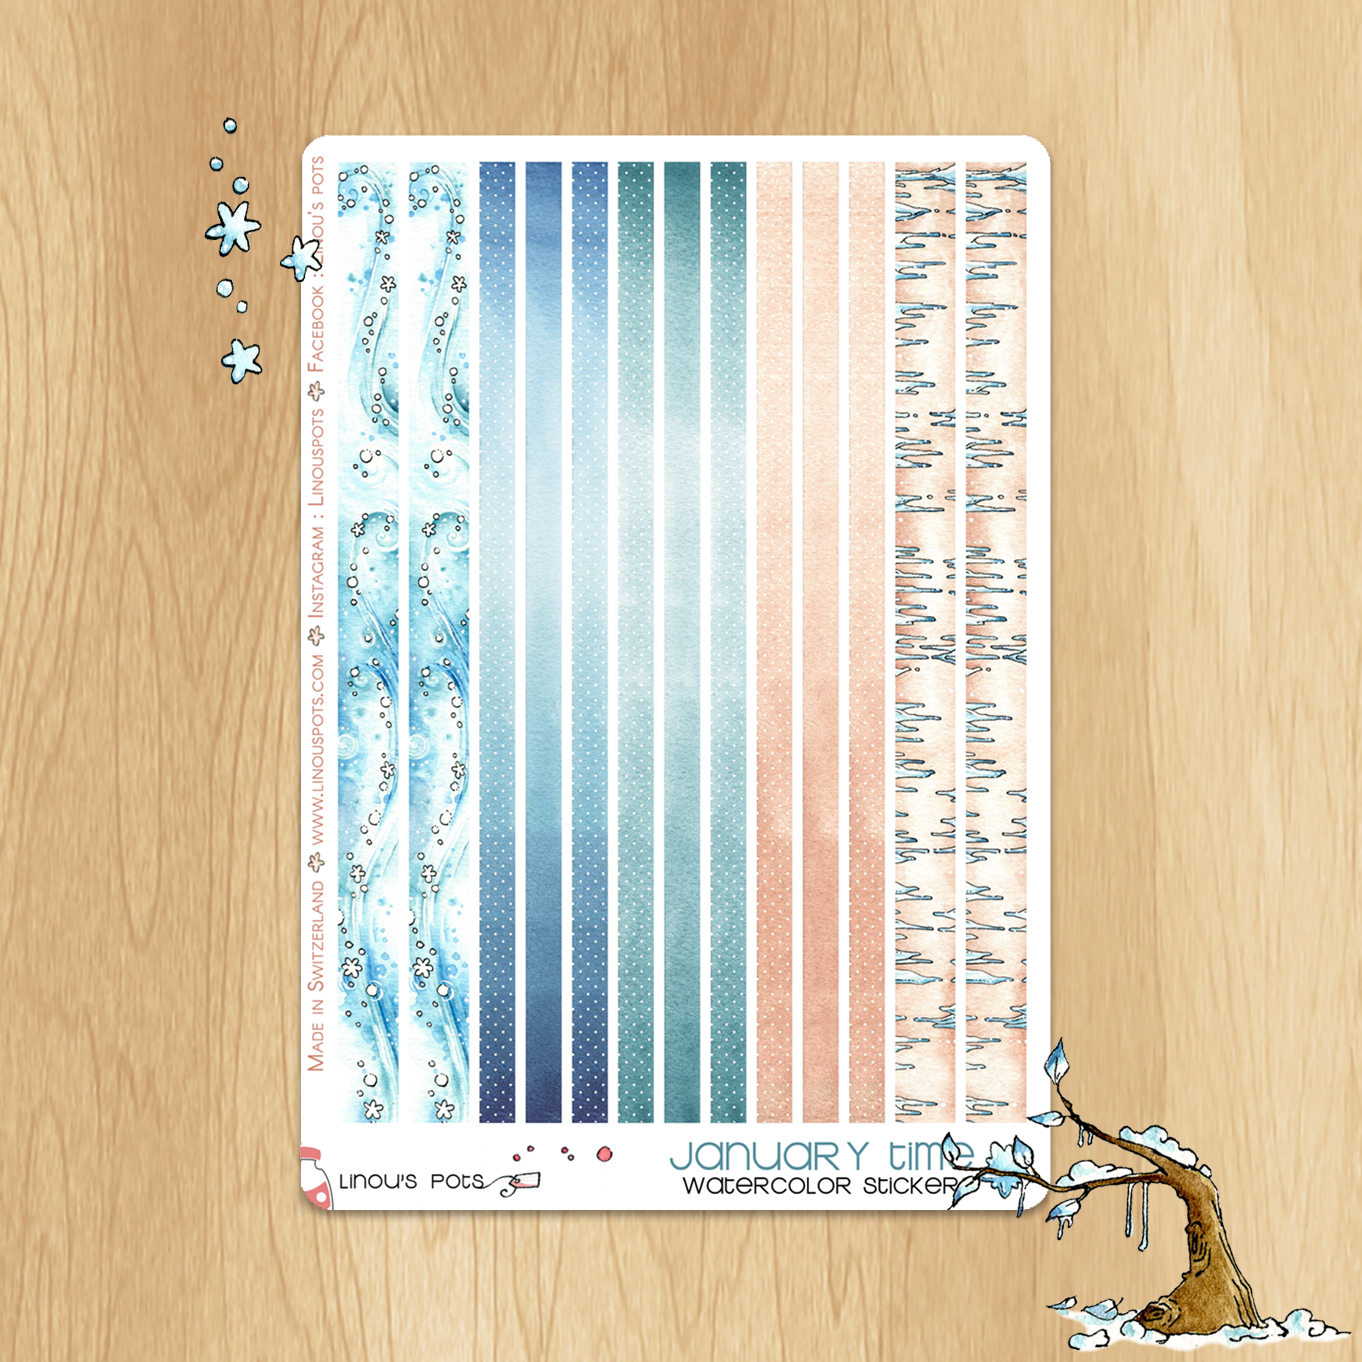 Frosty Times - Watercolor Planner Sticker s- 13 Washis Stickers